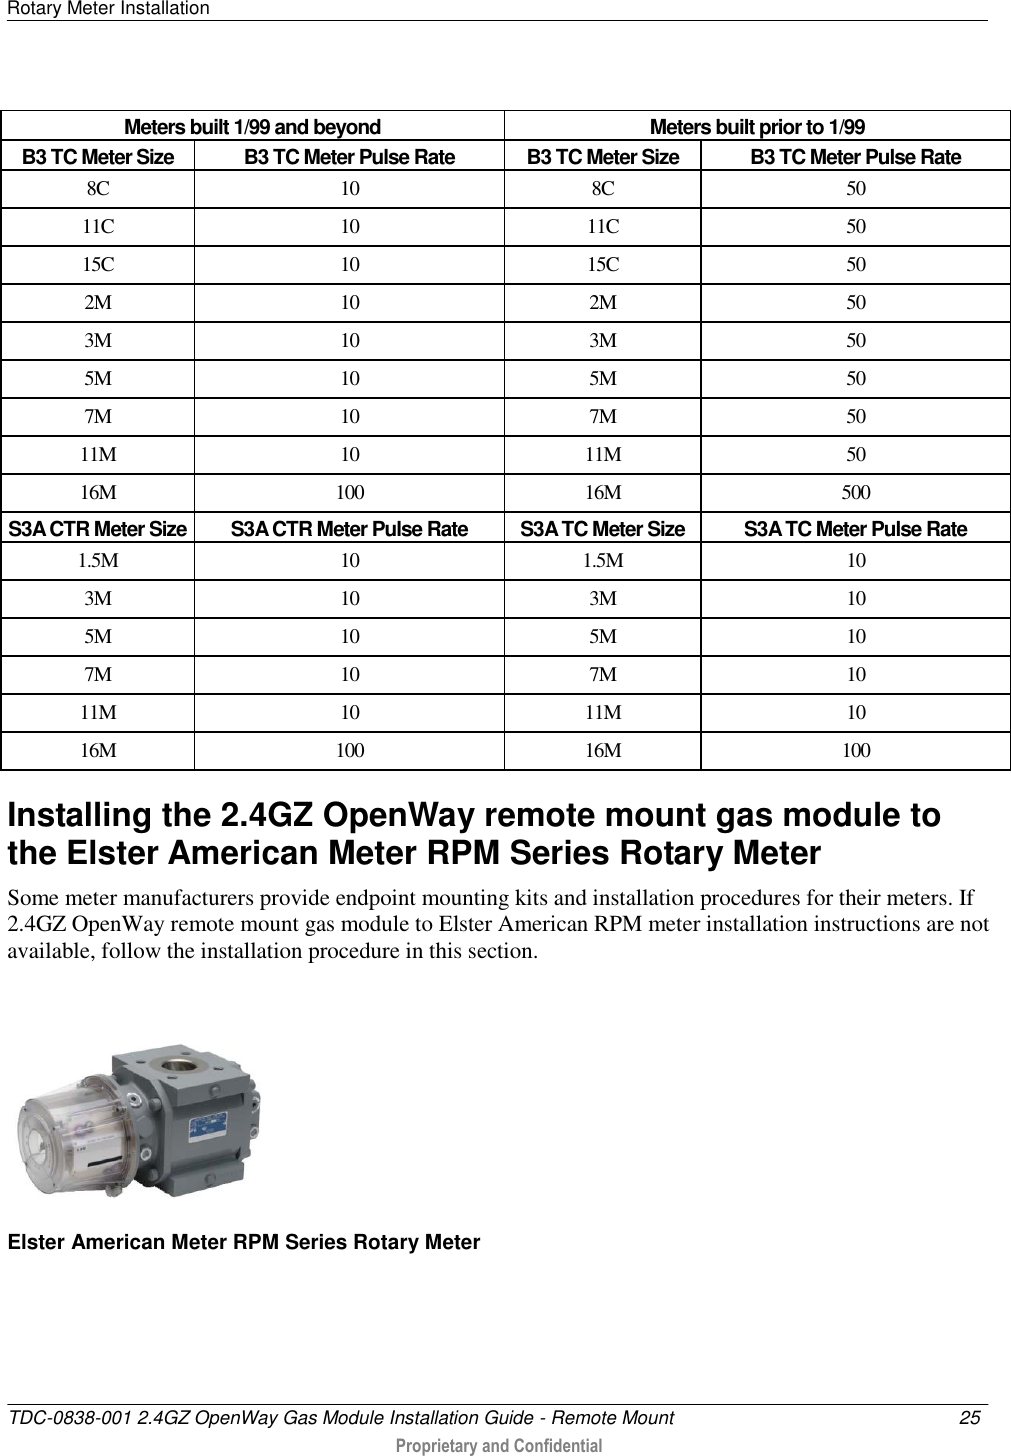 Rotary Meter Installation   TDC-0838-001 2.4GZ OpenWay Gas Module Installation Guide - Remote Mount  25   Proprietary and Confidential      Meters built 1/99 and beyond Meters built prior to 1/99 B3 TC Meter Size B3 TC Meter Pulse Rate B3 TC Meter Size B3 TC Meter Pulse Rate 8C 10 8C 50 11C 10 11C 50 15C 10 15C 50 2M 10 2M 50 3M 10 3M 50 5M 10 5M 50 7M 10 7M 50 11M 10 11M 50 16M 100 16M 500 S3A CTR Meter Size S3A CTR Meter Pulse Rate S3A TC Meter Size S3A TC Meter Pulse Rate 1.5M 10 1.5M 10 3M 10 3M 10 5M 10 5M 10 7M 10 7M 10 11M 10 11M 10 16M 100 16M 100 Installing the 2.4GZ OpenWay remote mount gas module to the Elster American Meter RPM Series Rotary Meter Some meter manufacturers provide endpoint mounting kits and installation procedures for their meters. If 2.4GZ OpenWay remote mount gas module to Elster American RPM meter installation instructions are not available, follow the installation procedure in this section.   Elster American Meter RPM Series Rotary Meter  